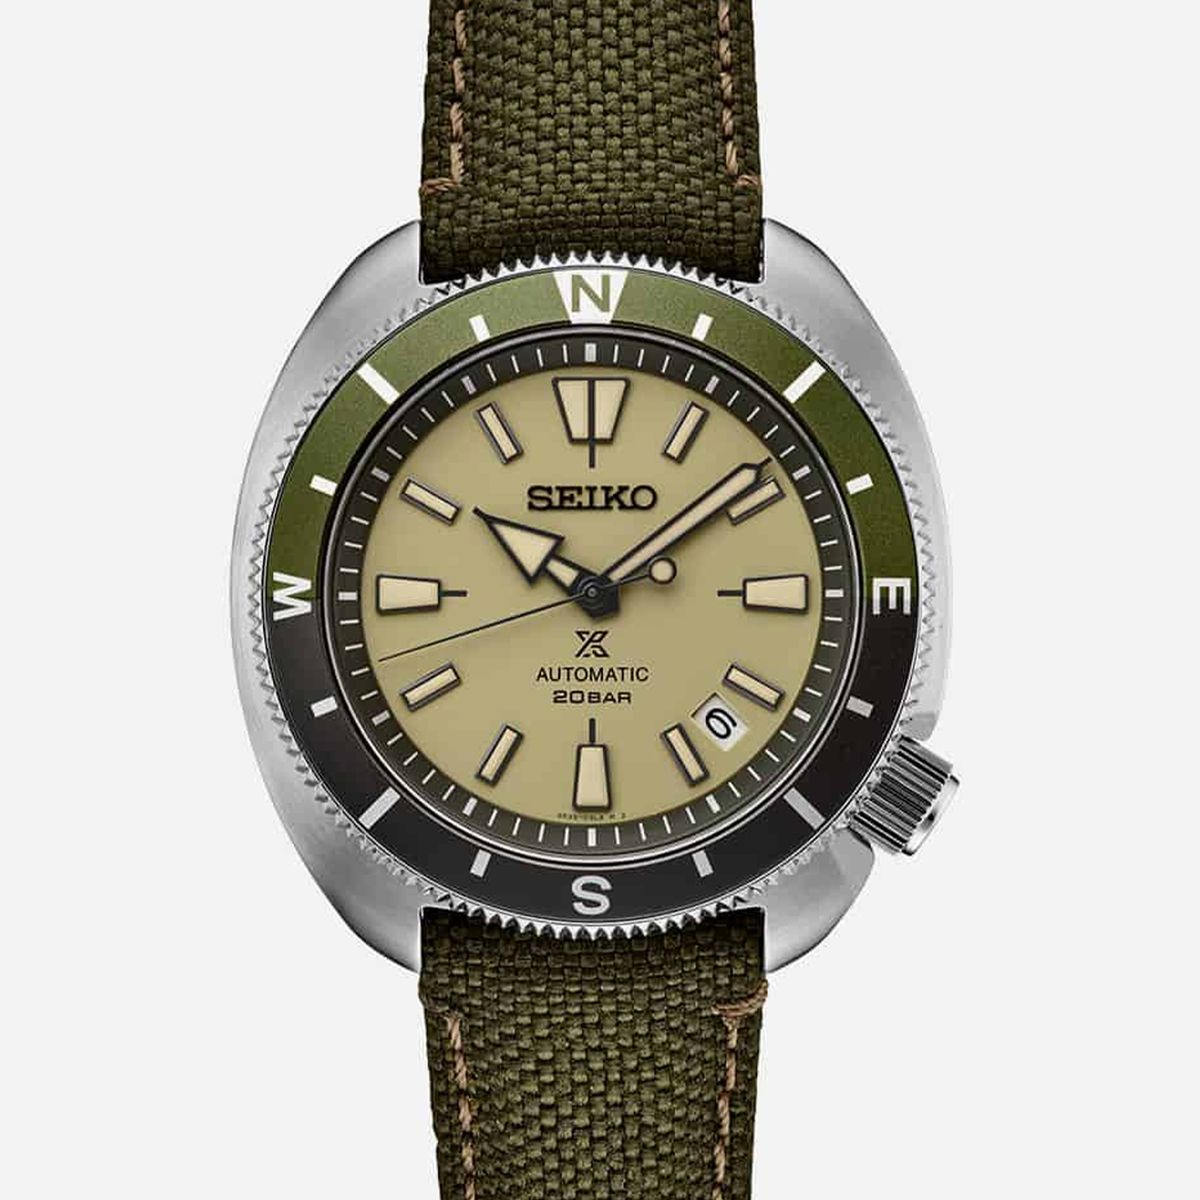 Seiko's Famous 'Turtle' Dive Watch Has Been Reimagined for Hiking